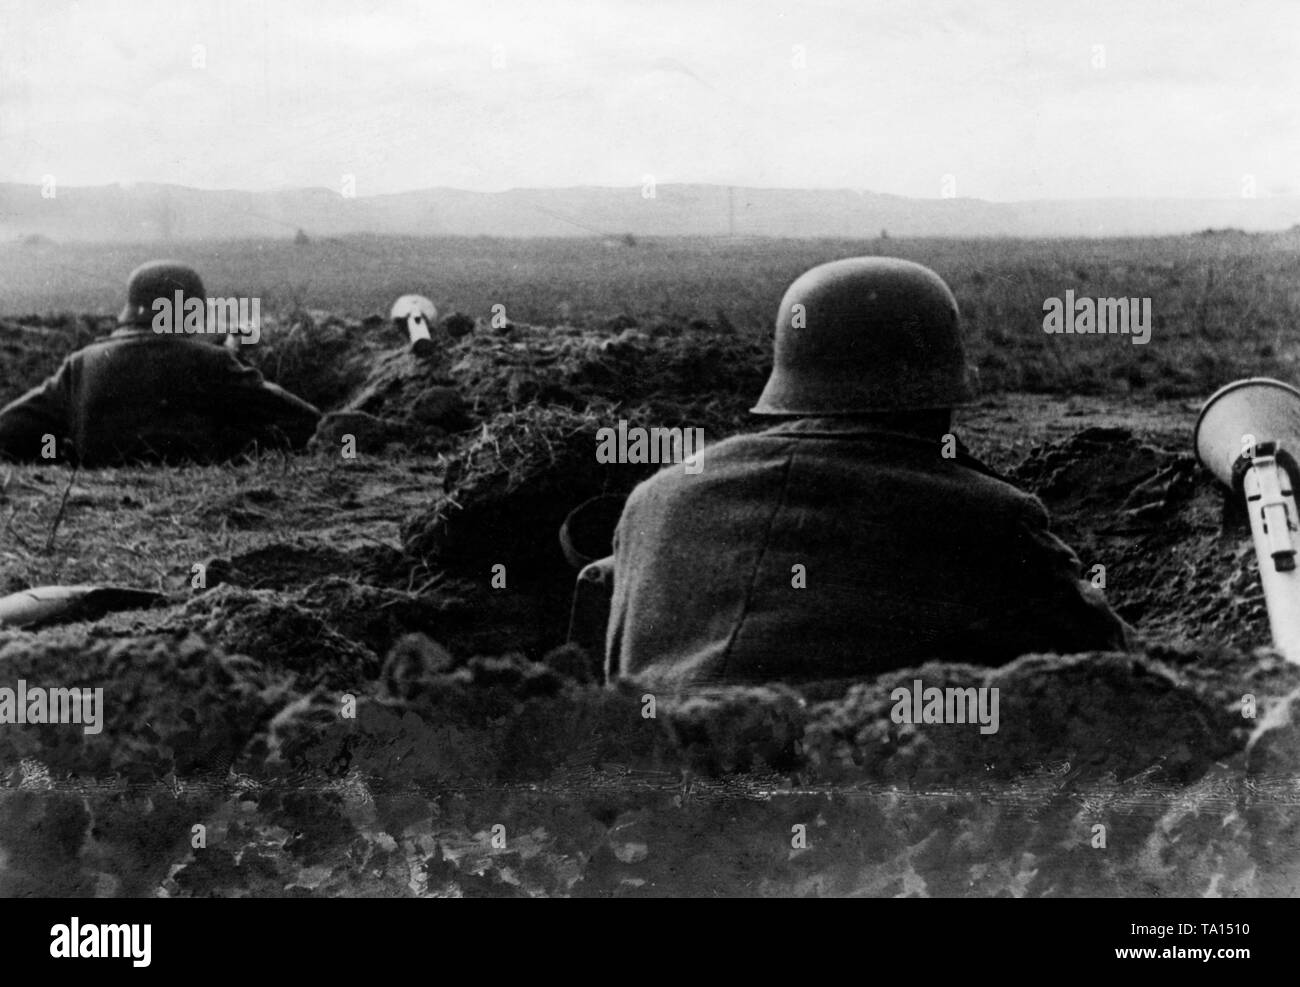 Soldiers of the Wehrmacht in their foxholes awaiting the onslaught of the Red Army in Berlin. Beside the soldiers there are anti-tank rocket launchers, often the only remaining weapon against the Russian tanks. Stock Photo